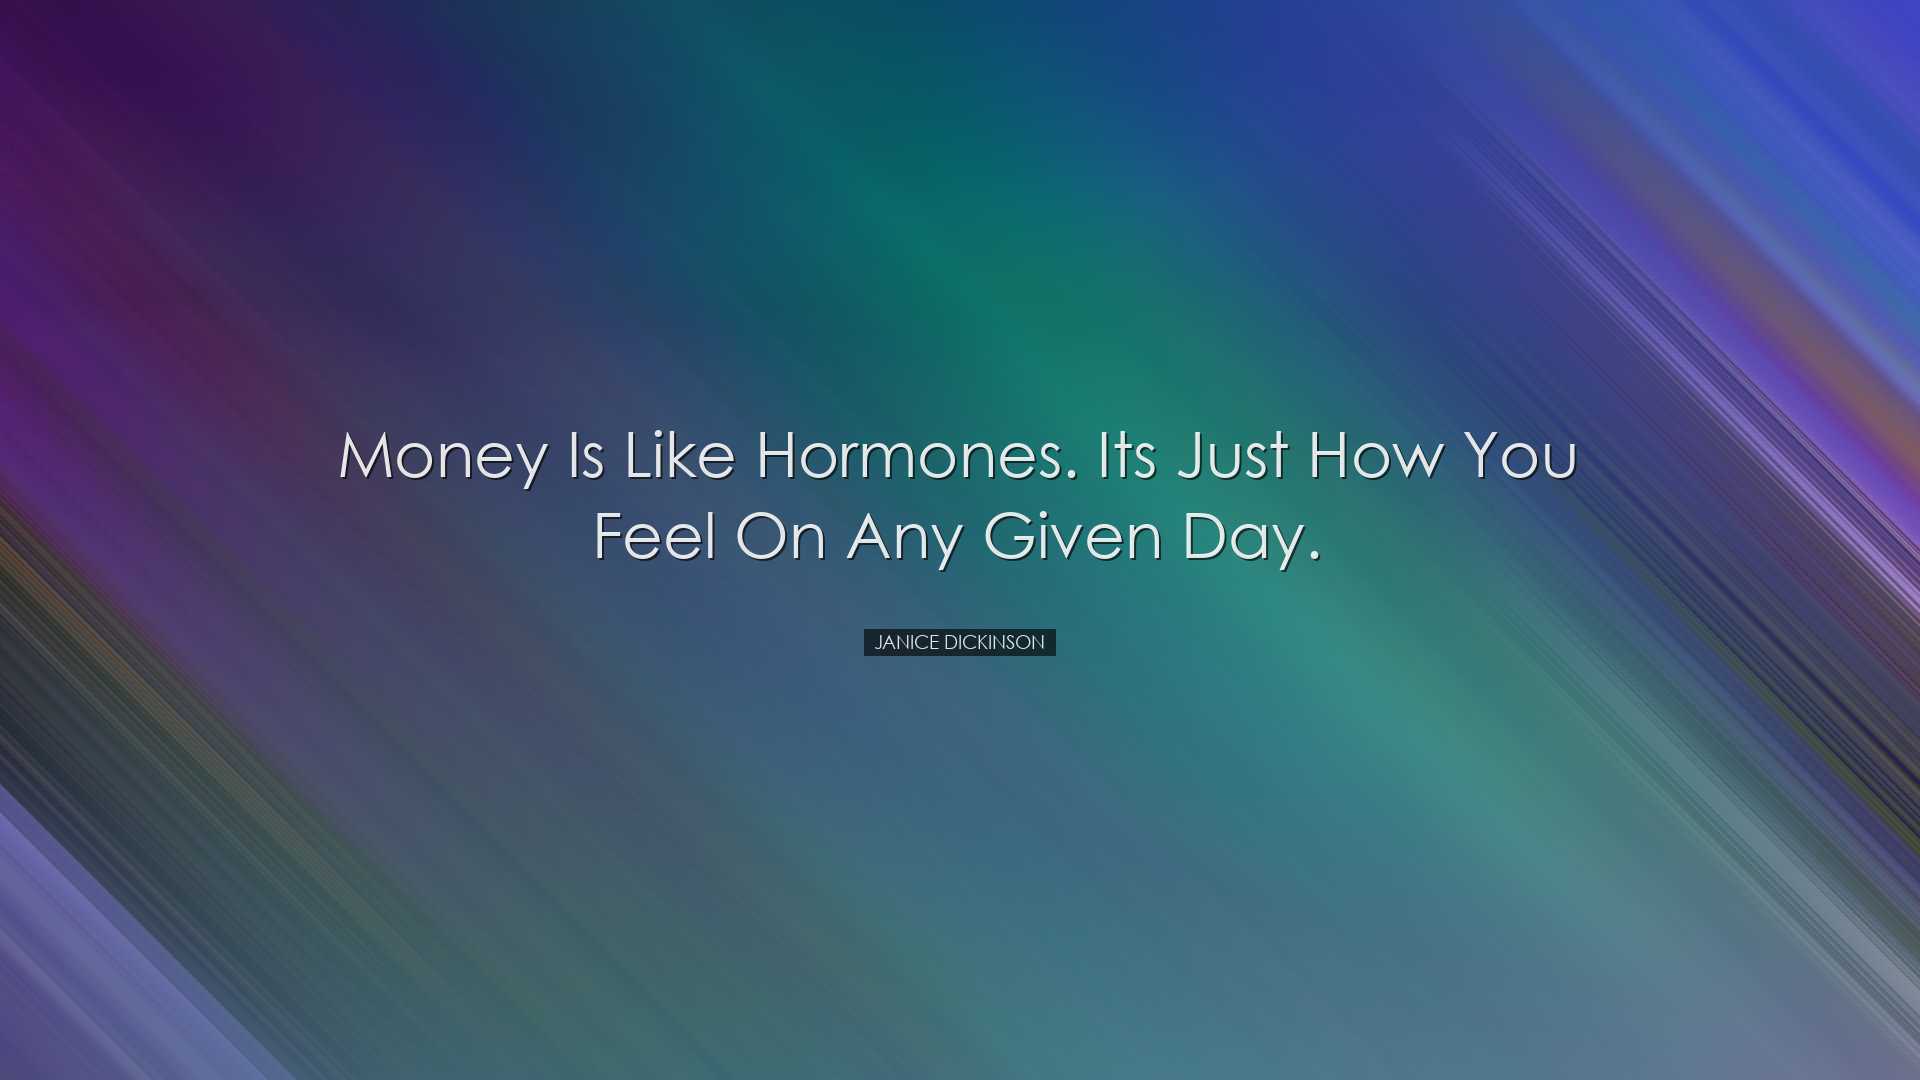 Money is like hormones. Its just how you feel on any given day. -